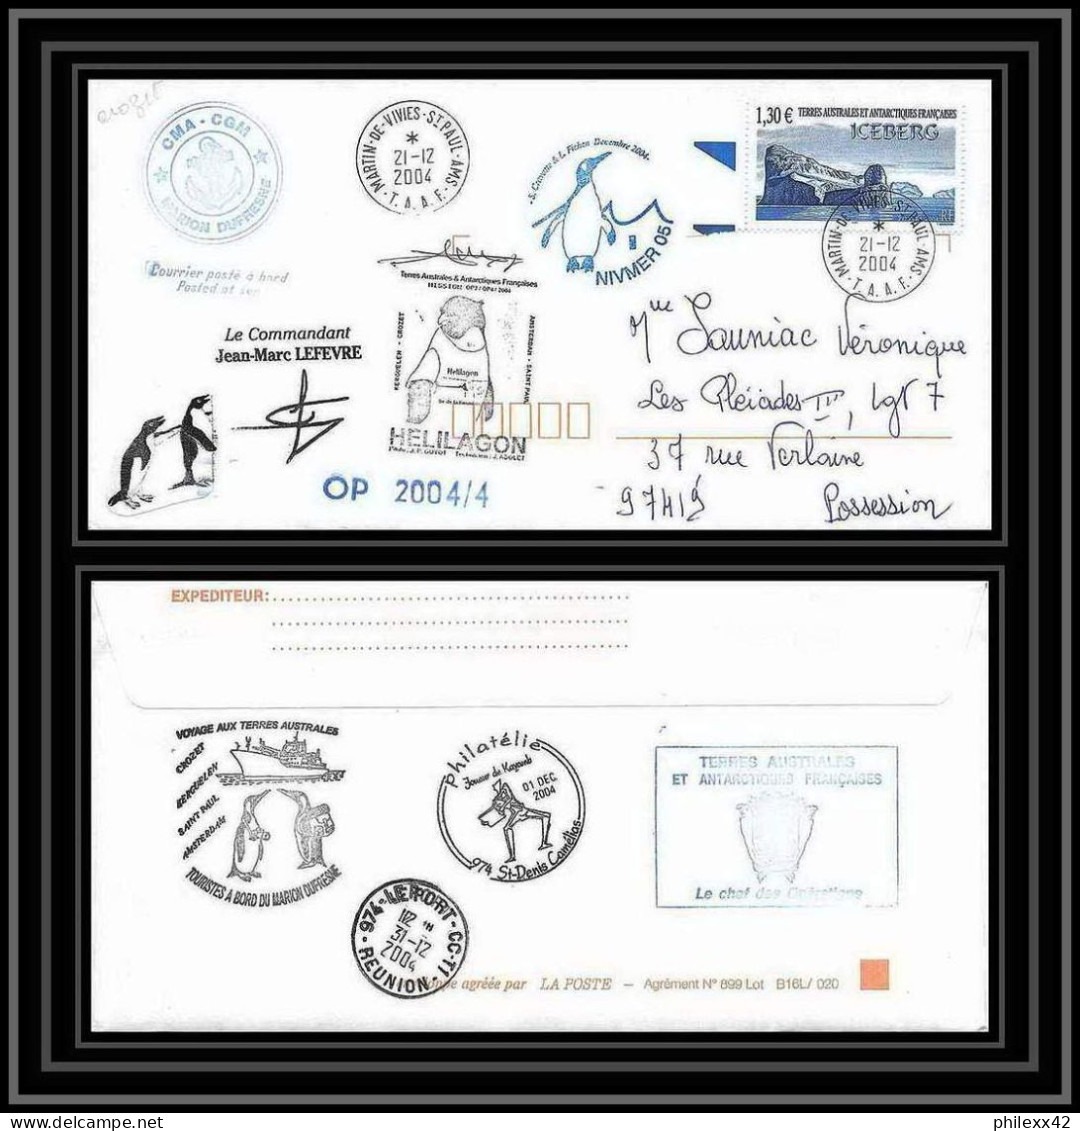 2485 ANTARCTIC Terres Australes TAAF Lettre Cover Dufresne 2 Signé Signed OP 2004/4 N°387 21/12/2004 Helilagon - Helicópteros